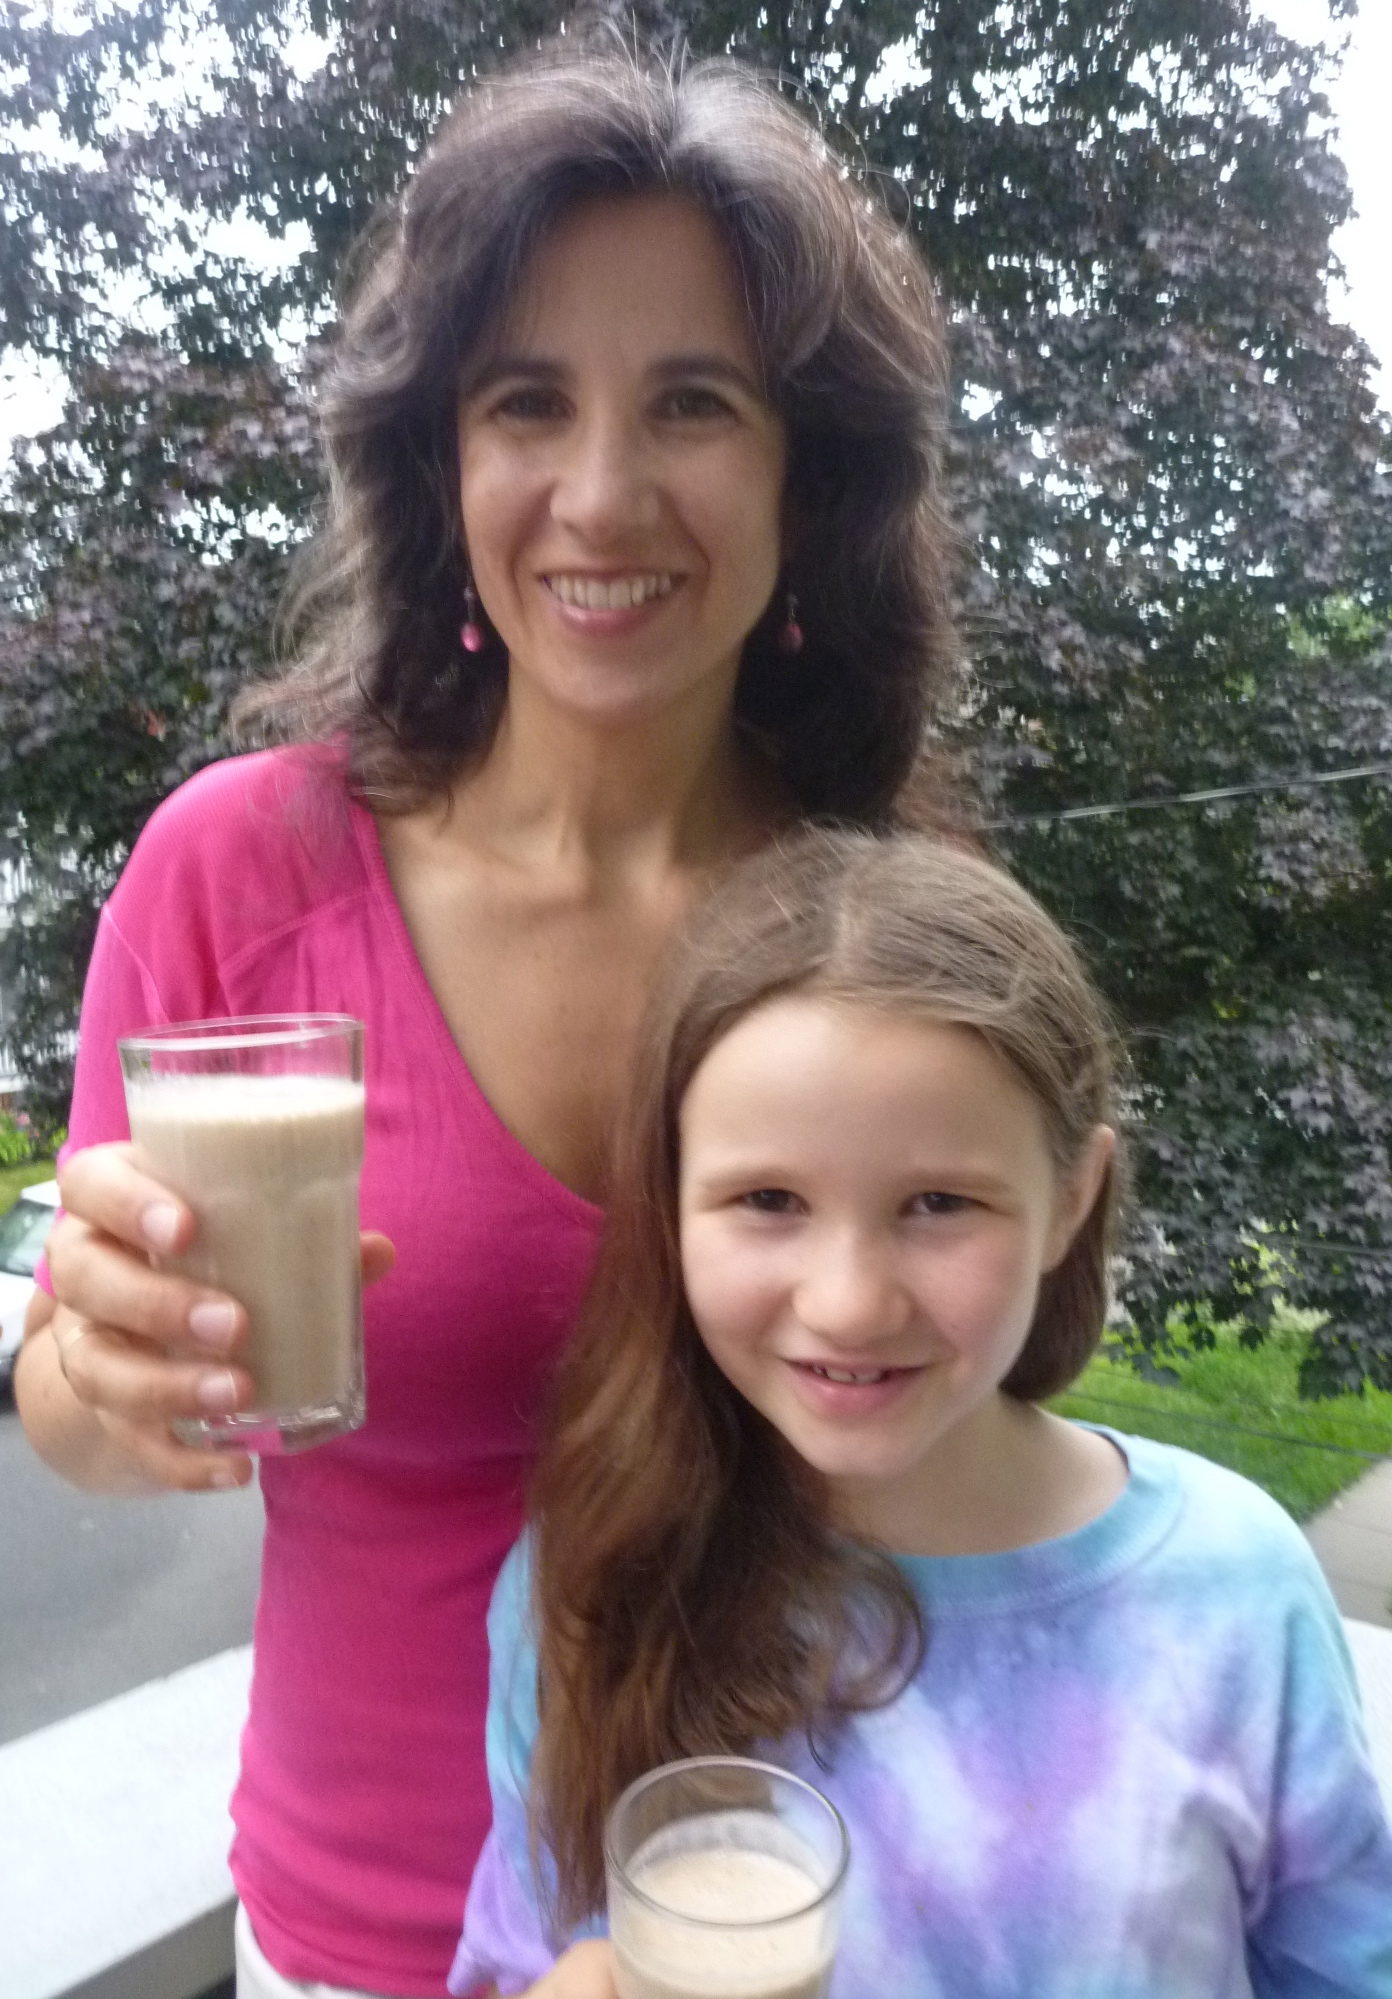 Smoothies: Easy, Kid-Friendly and Nutritious – includes 2 recipes!